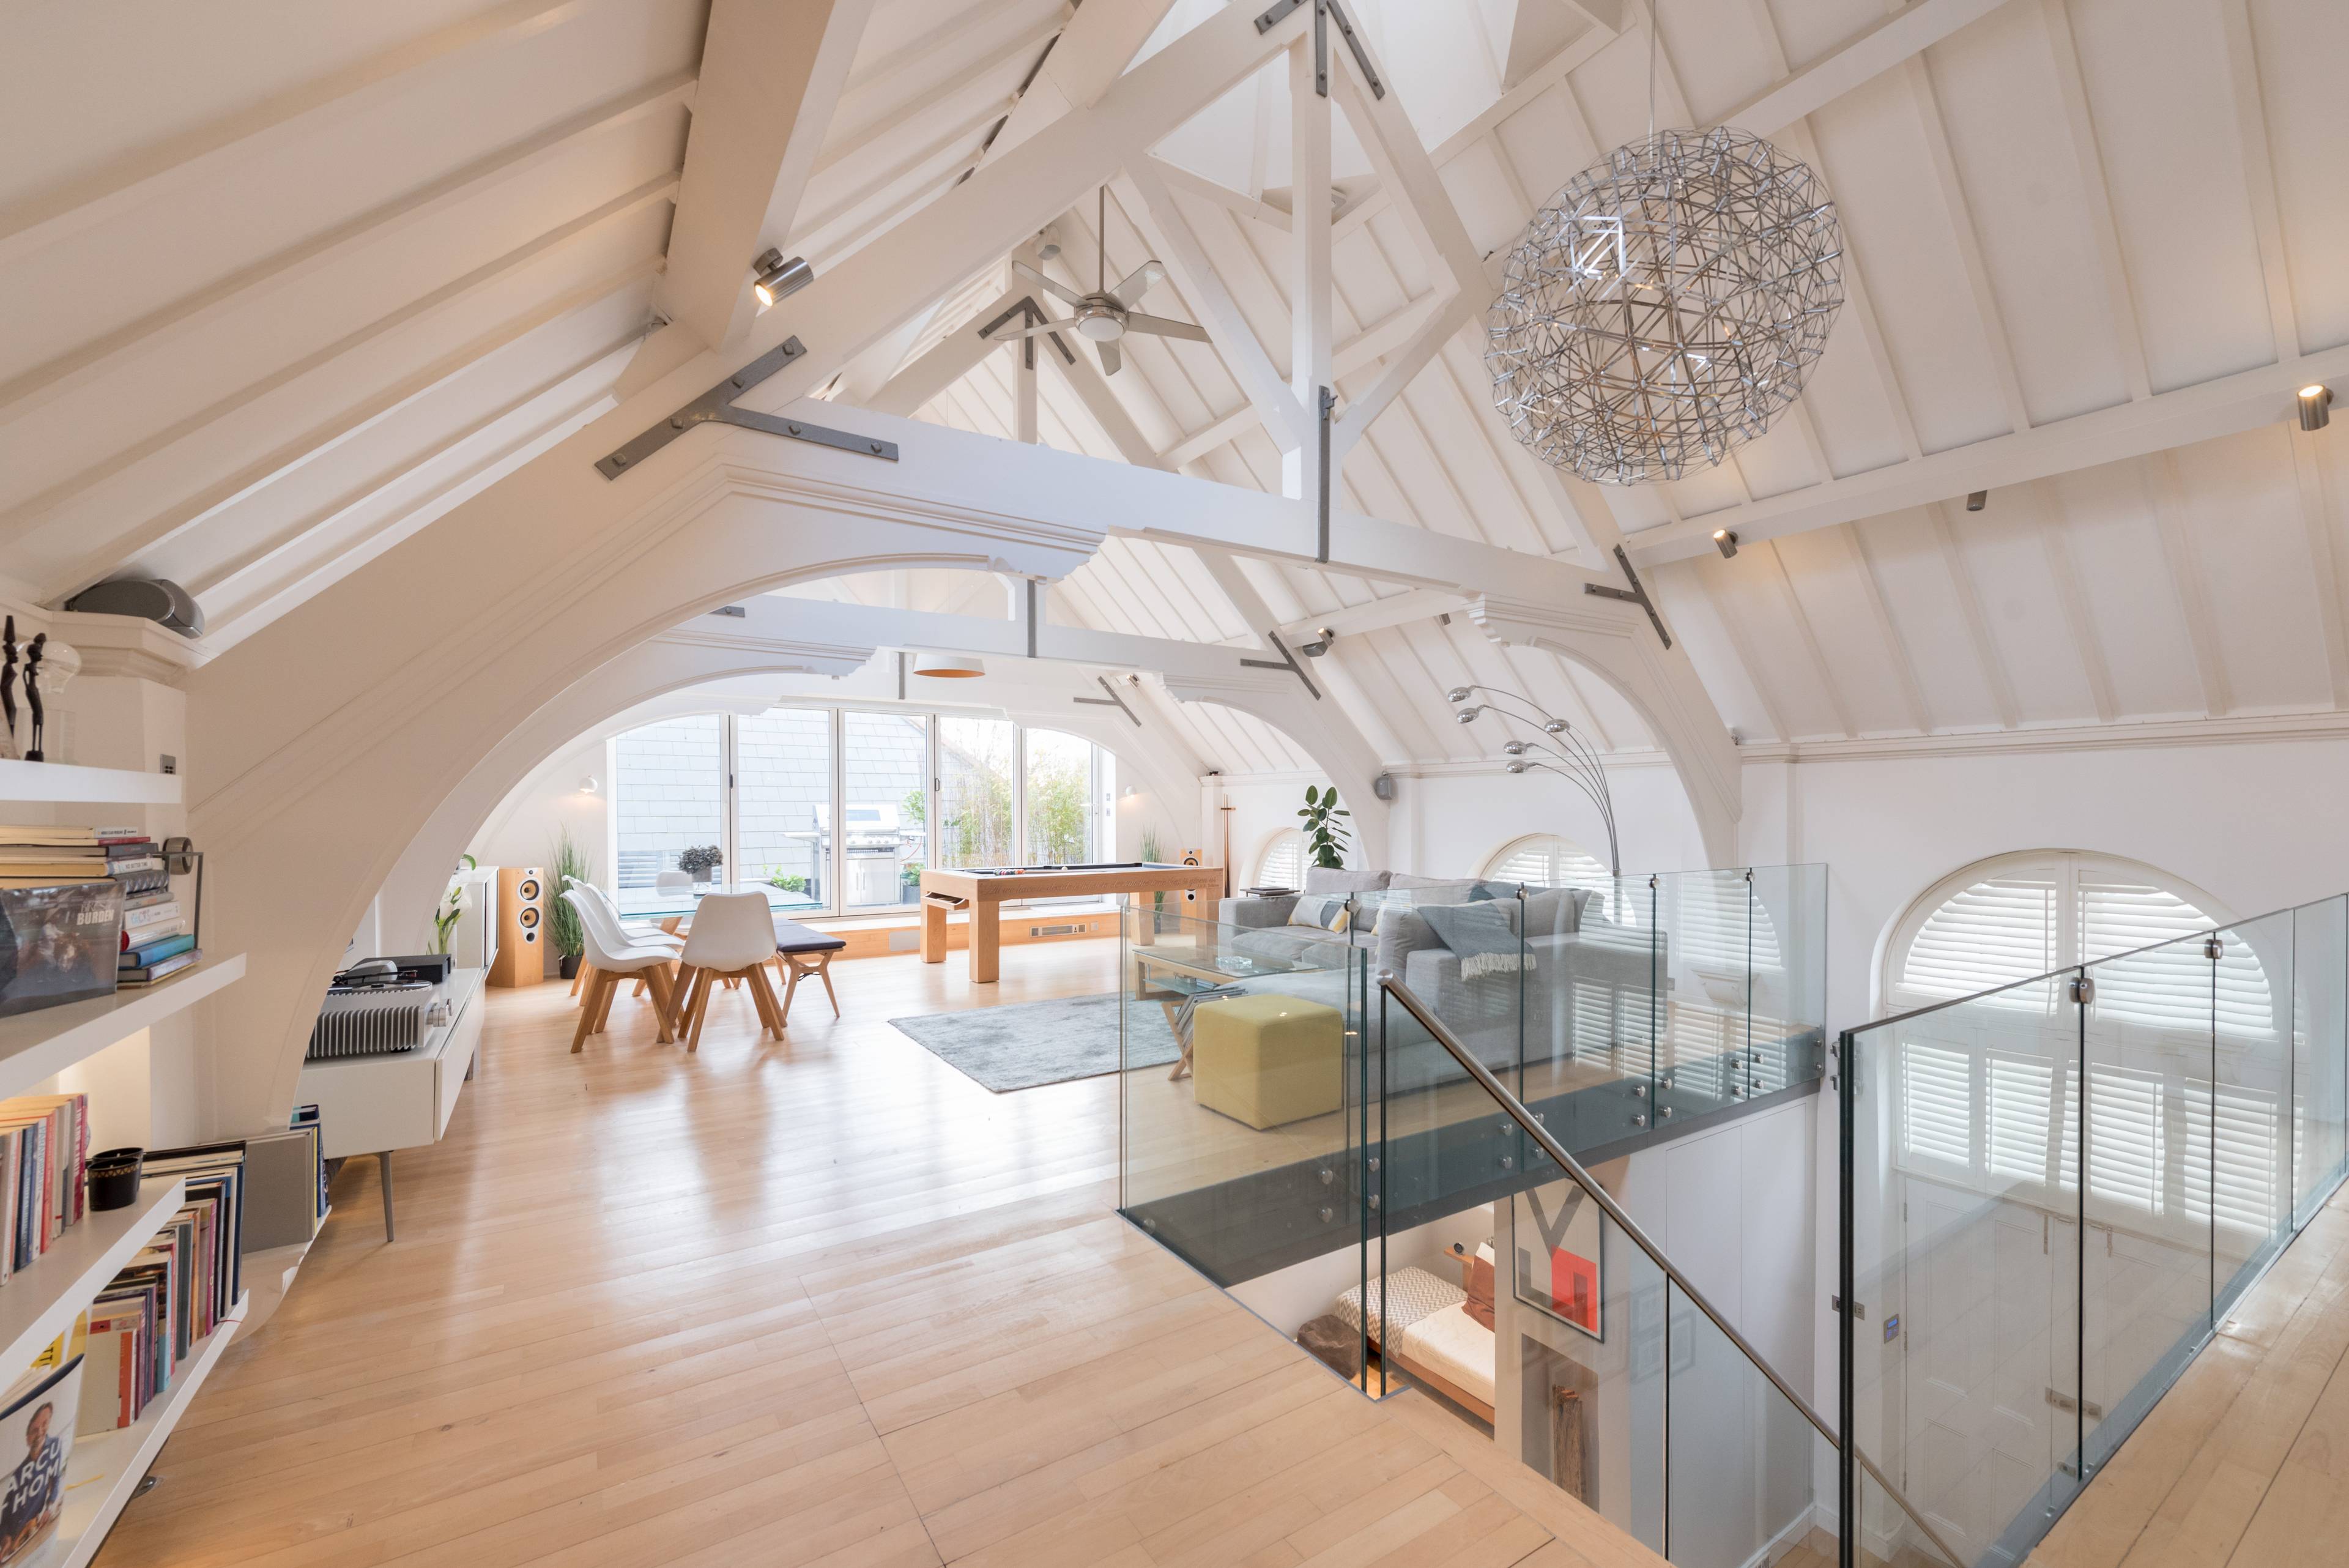 Fabulous take on Loft style living. Two bedroom house with endless ceiling height and wine cellar at this converted former magistrates court makes a perfect space offering bright and contemporary living in a great West London location.